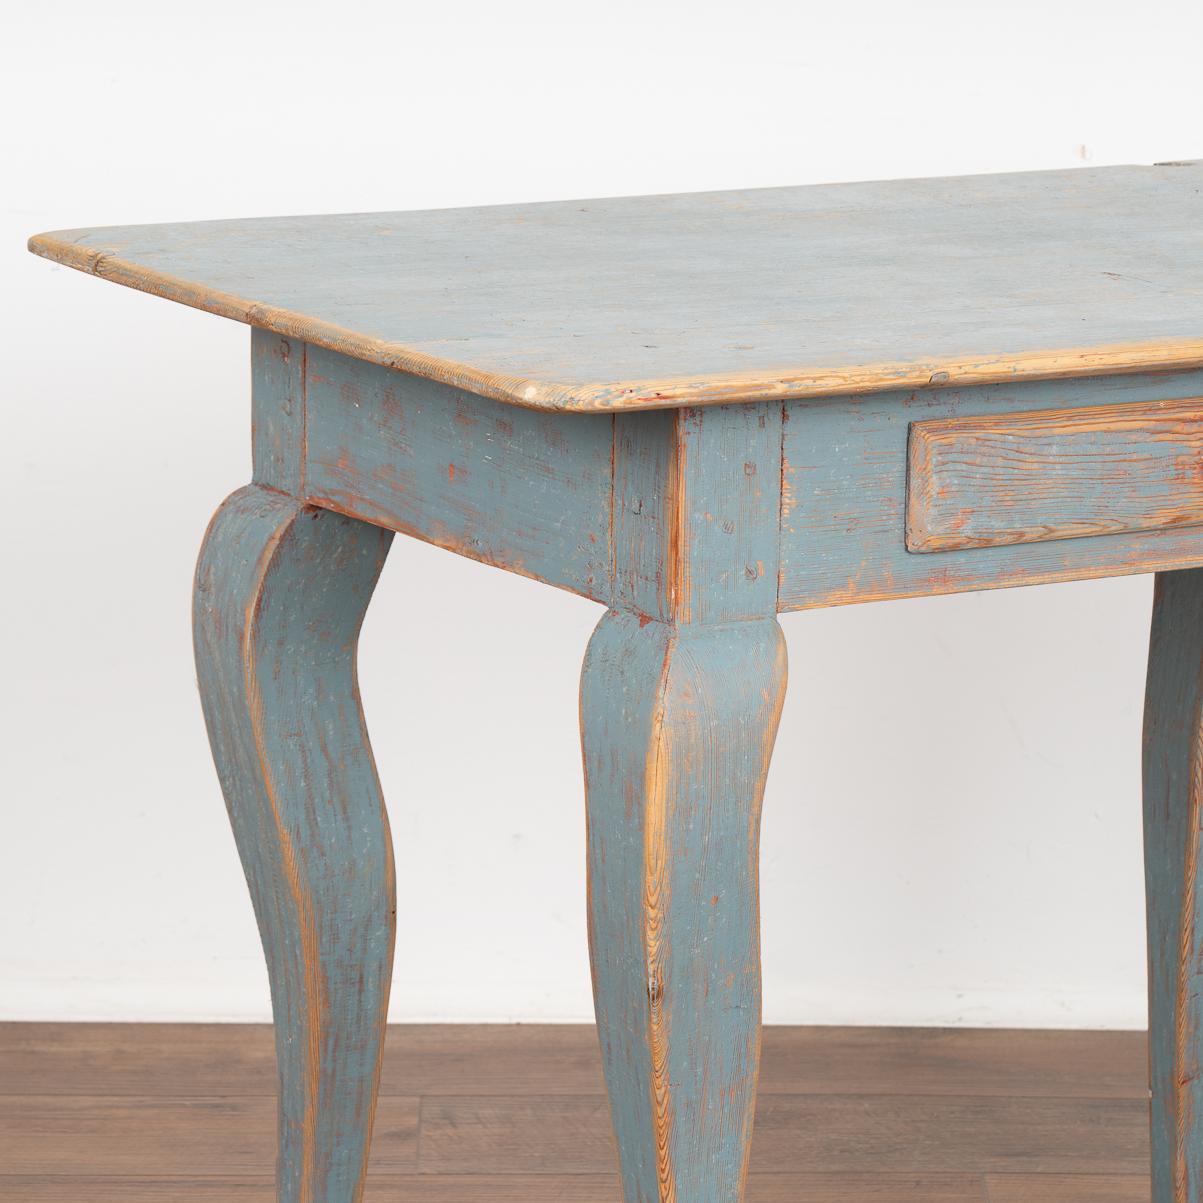 Blue Painted Pine Side Table With Cabriolet Legs, Sweden circa 1820-40 For Sale 1